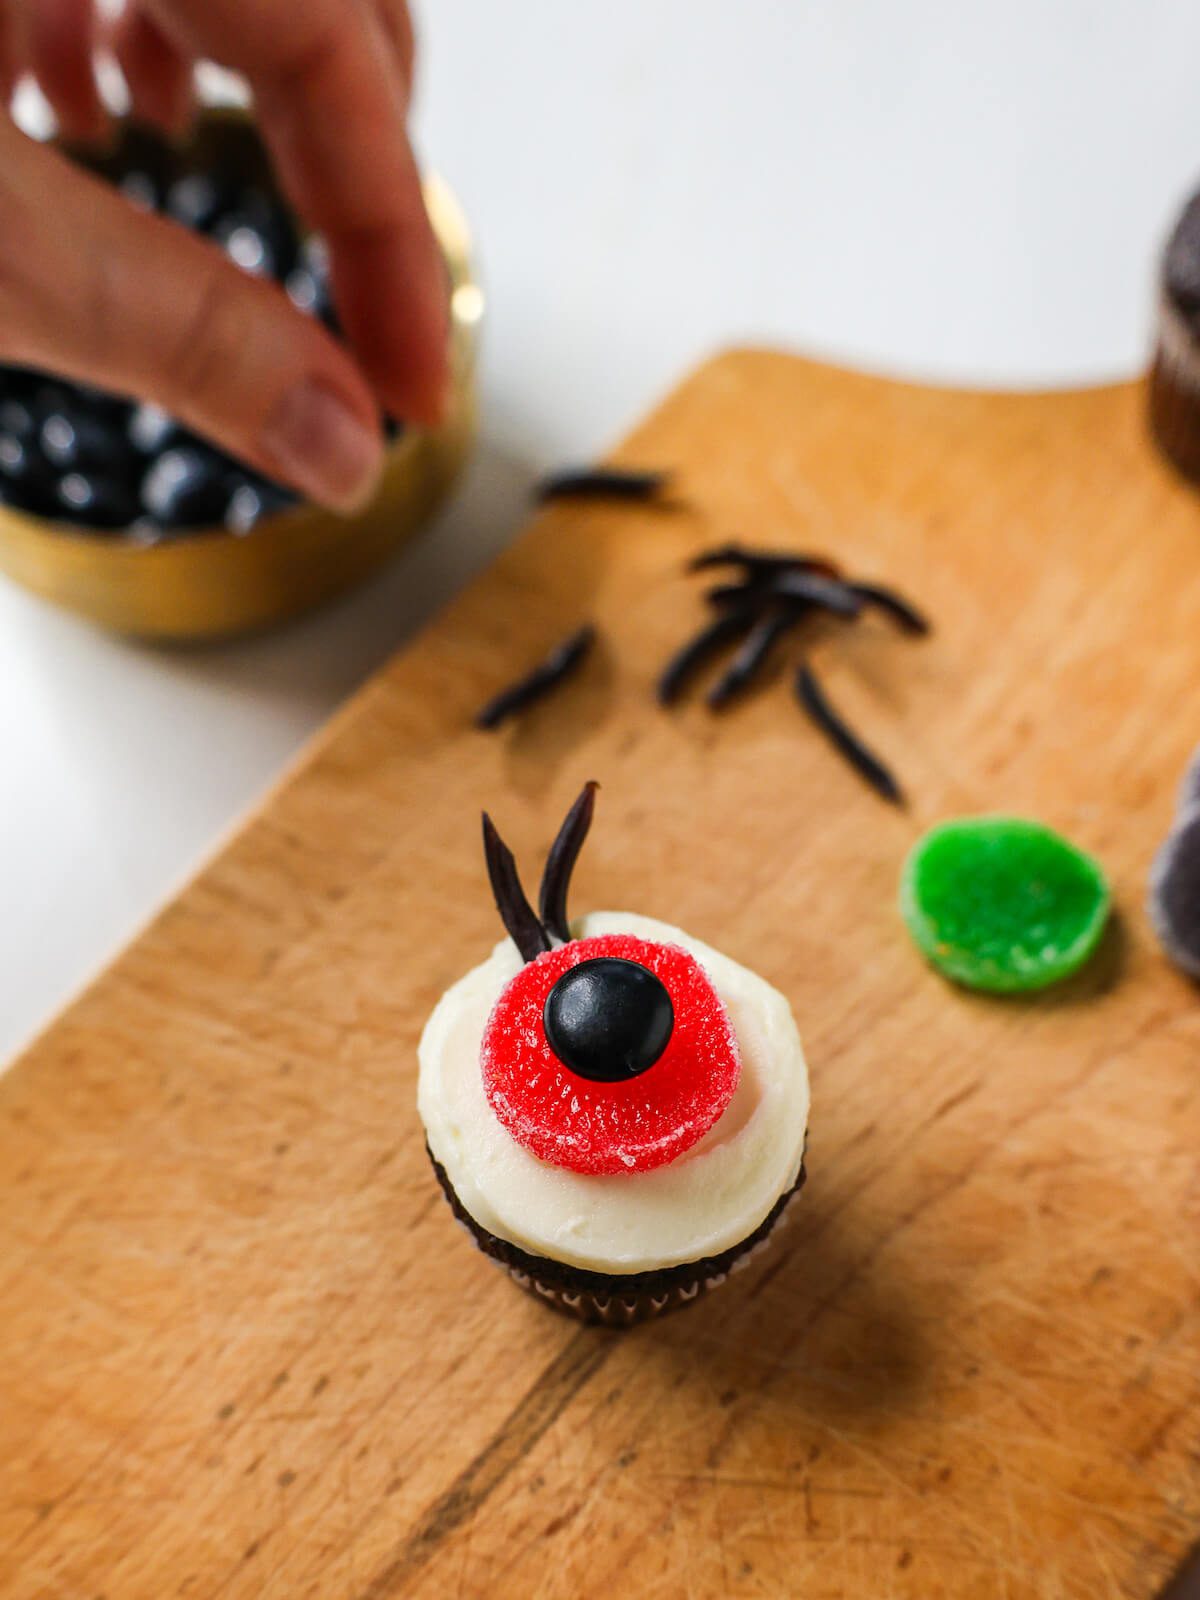 Placing cut licorice laces on a white frosted cupcake with a candy eyeball to create eyelashes.